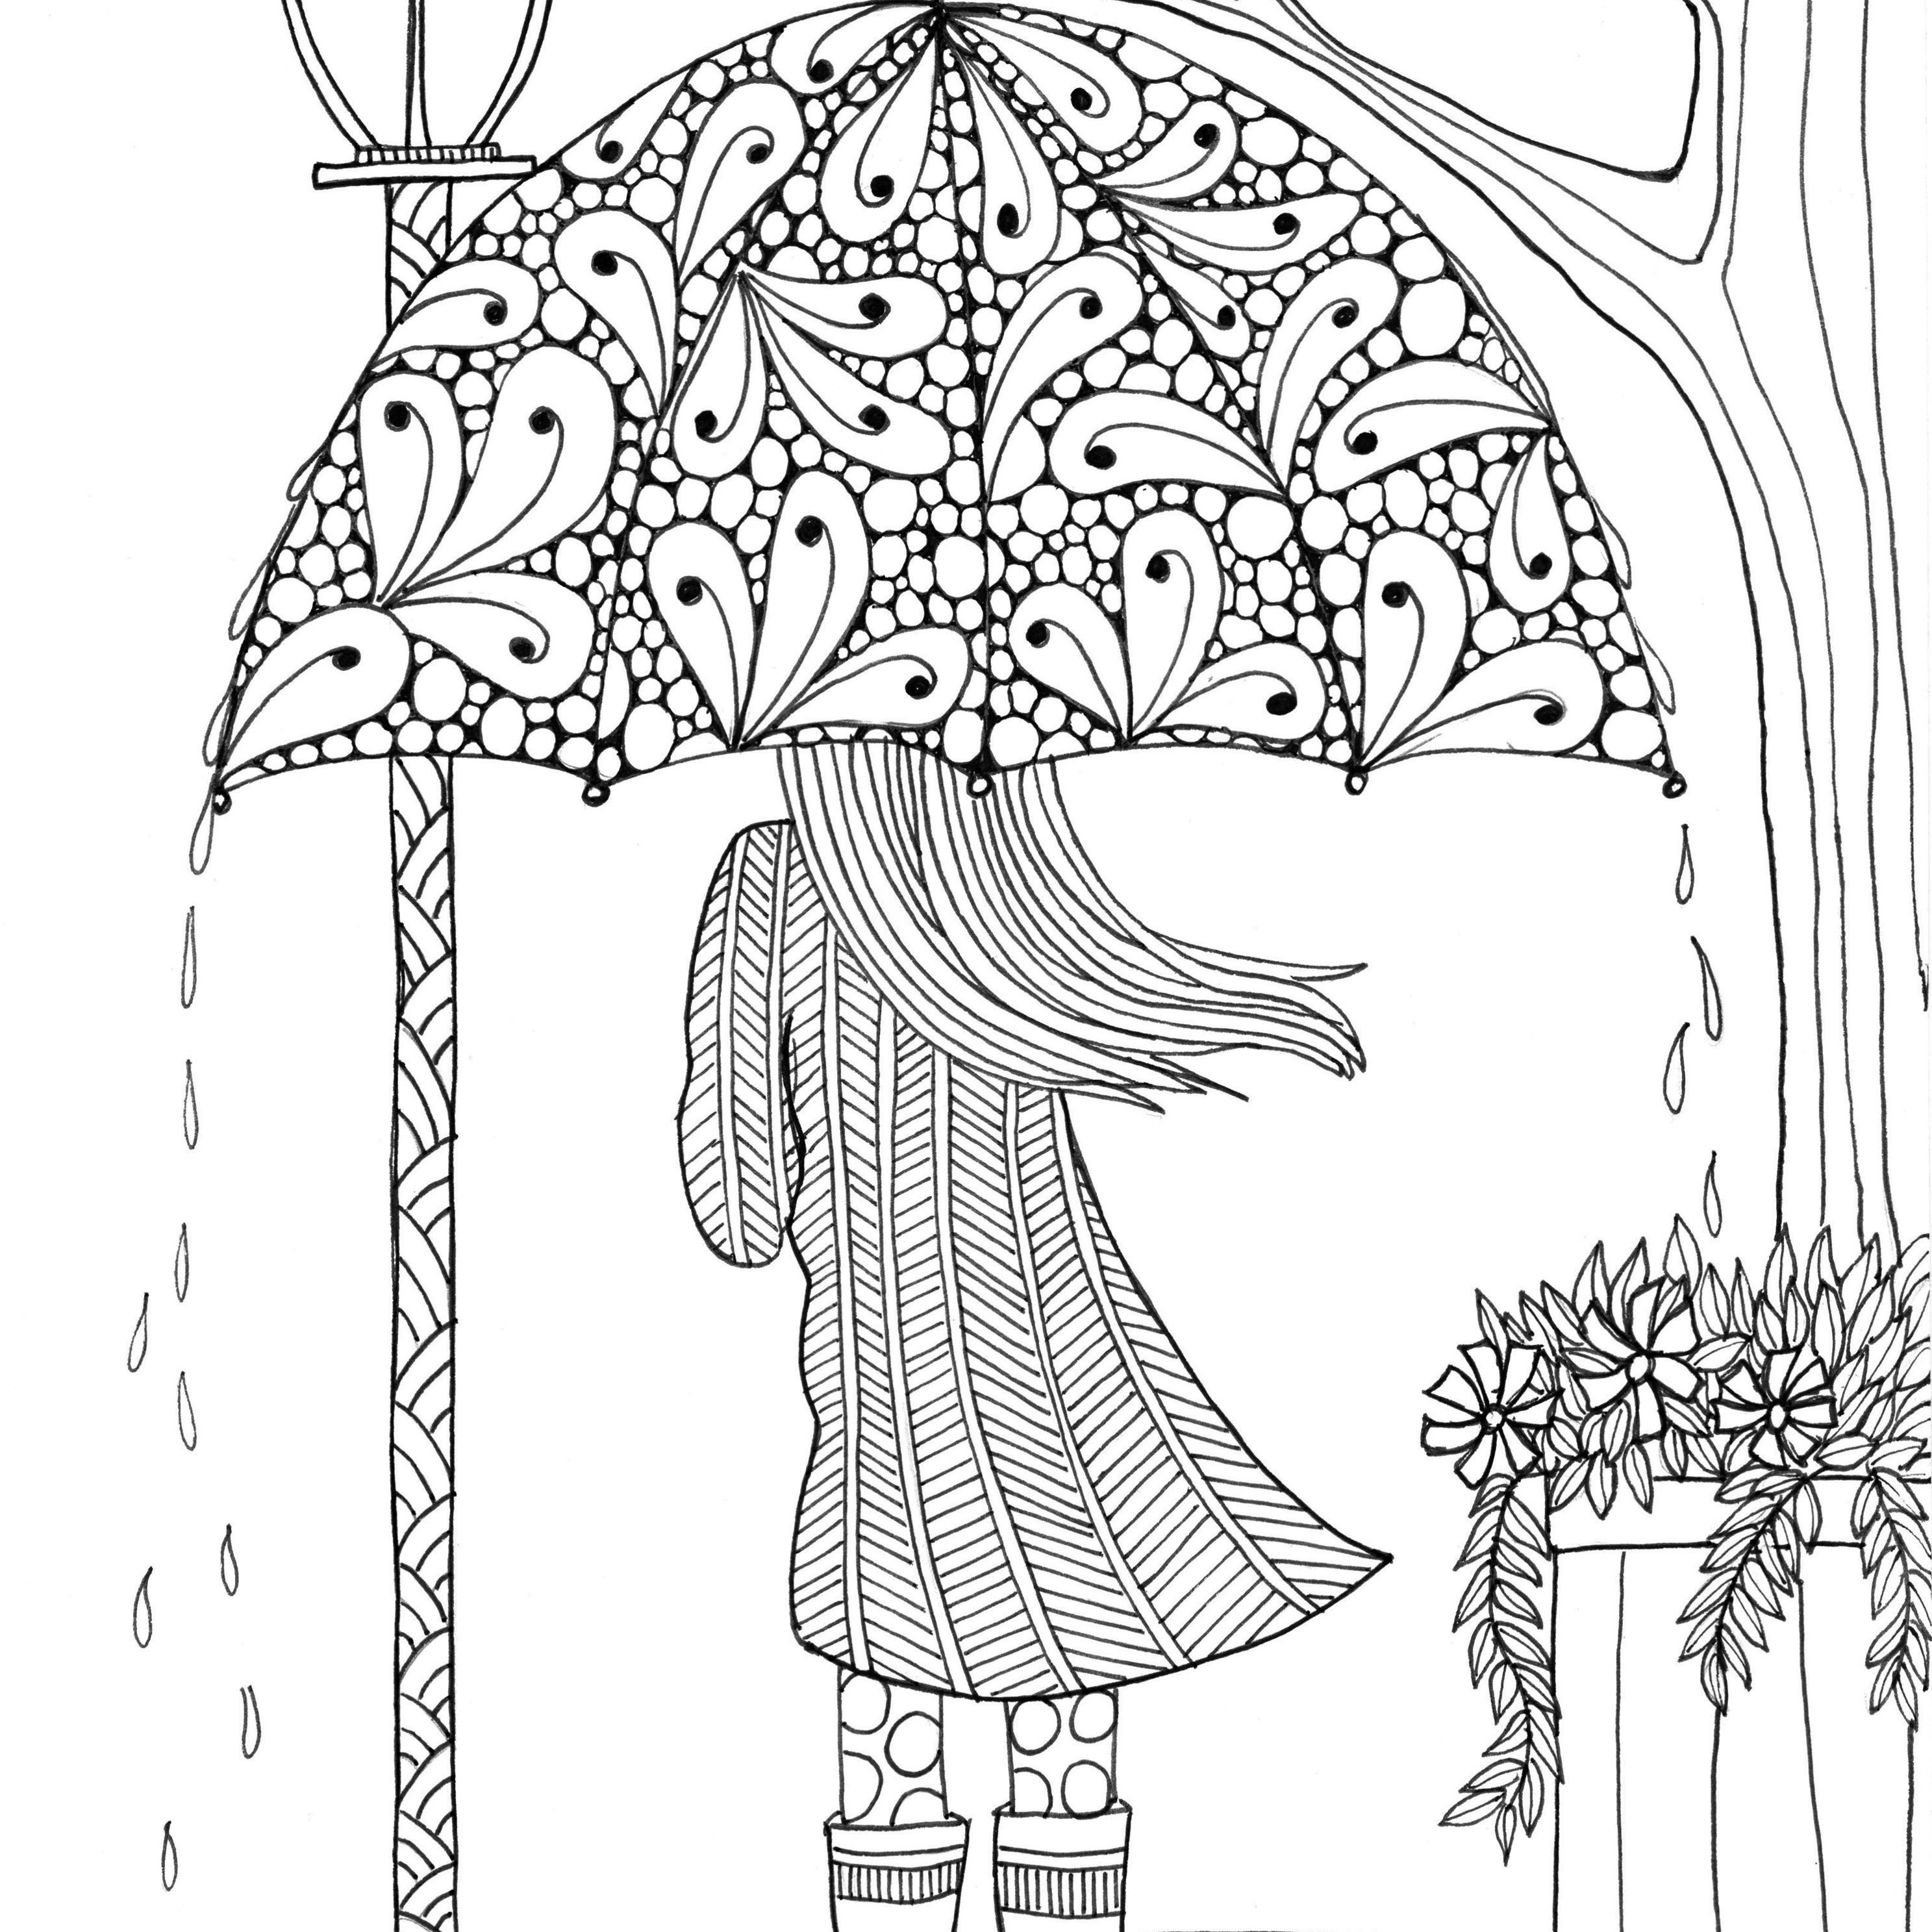 Free, Printable Coloring Pages For Adults - Free Printable Coloring Pages For Adults